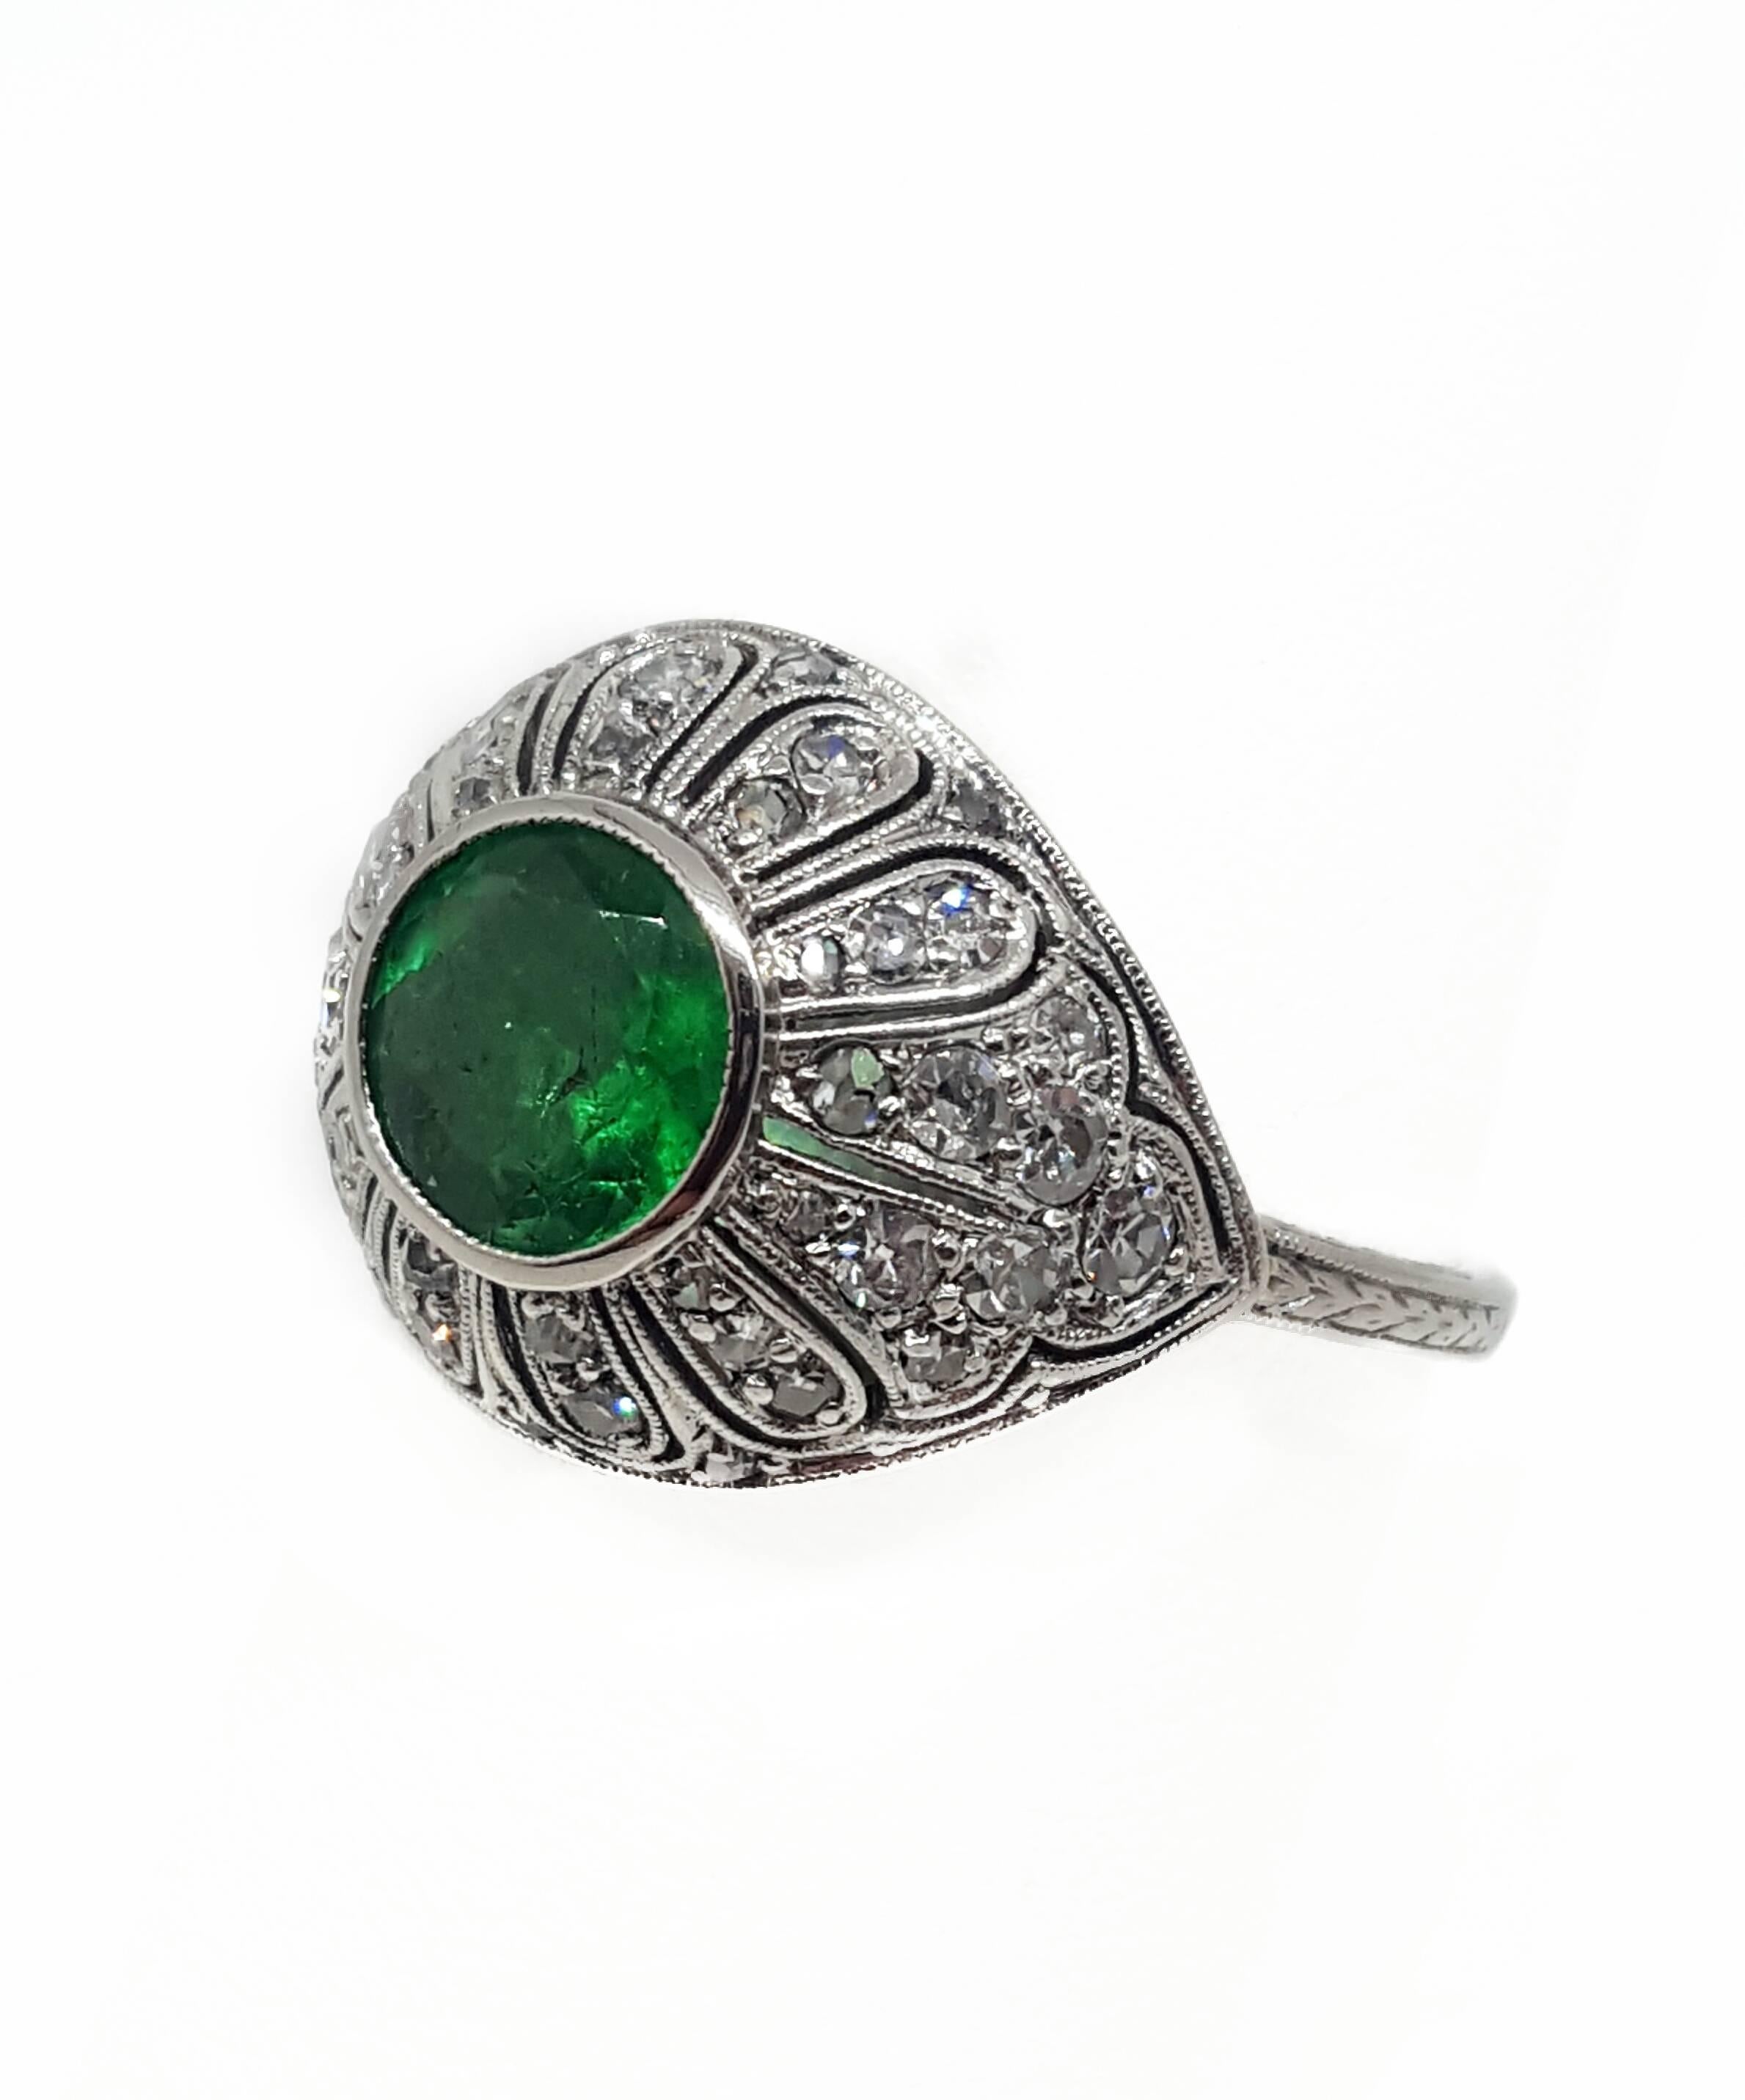 A platinum ring set with 40 round cut diamonds and 1 round cut emerald. The emerald weighs approximately 1.40 carats and is a fine medium light green color. The diamonds are VS2 to SI1 clarity and weigh approximately 0.50 carats total weight. The